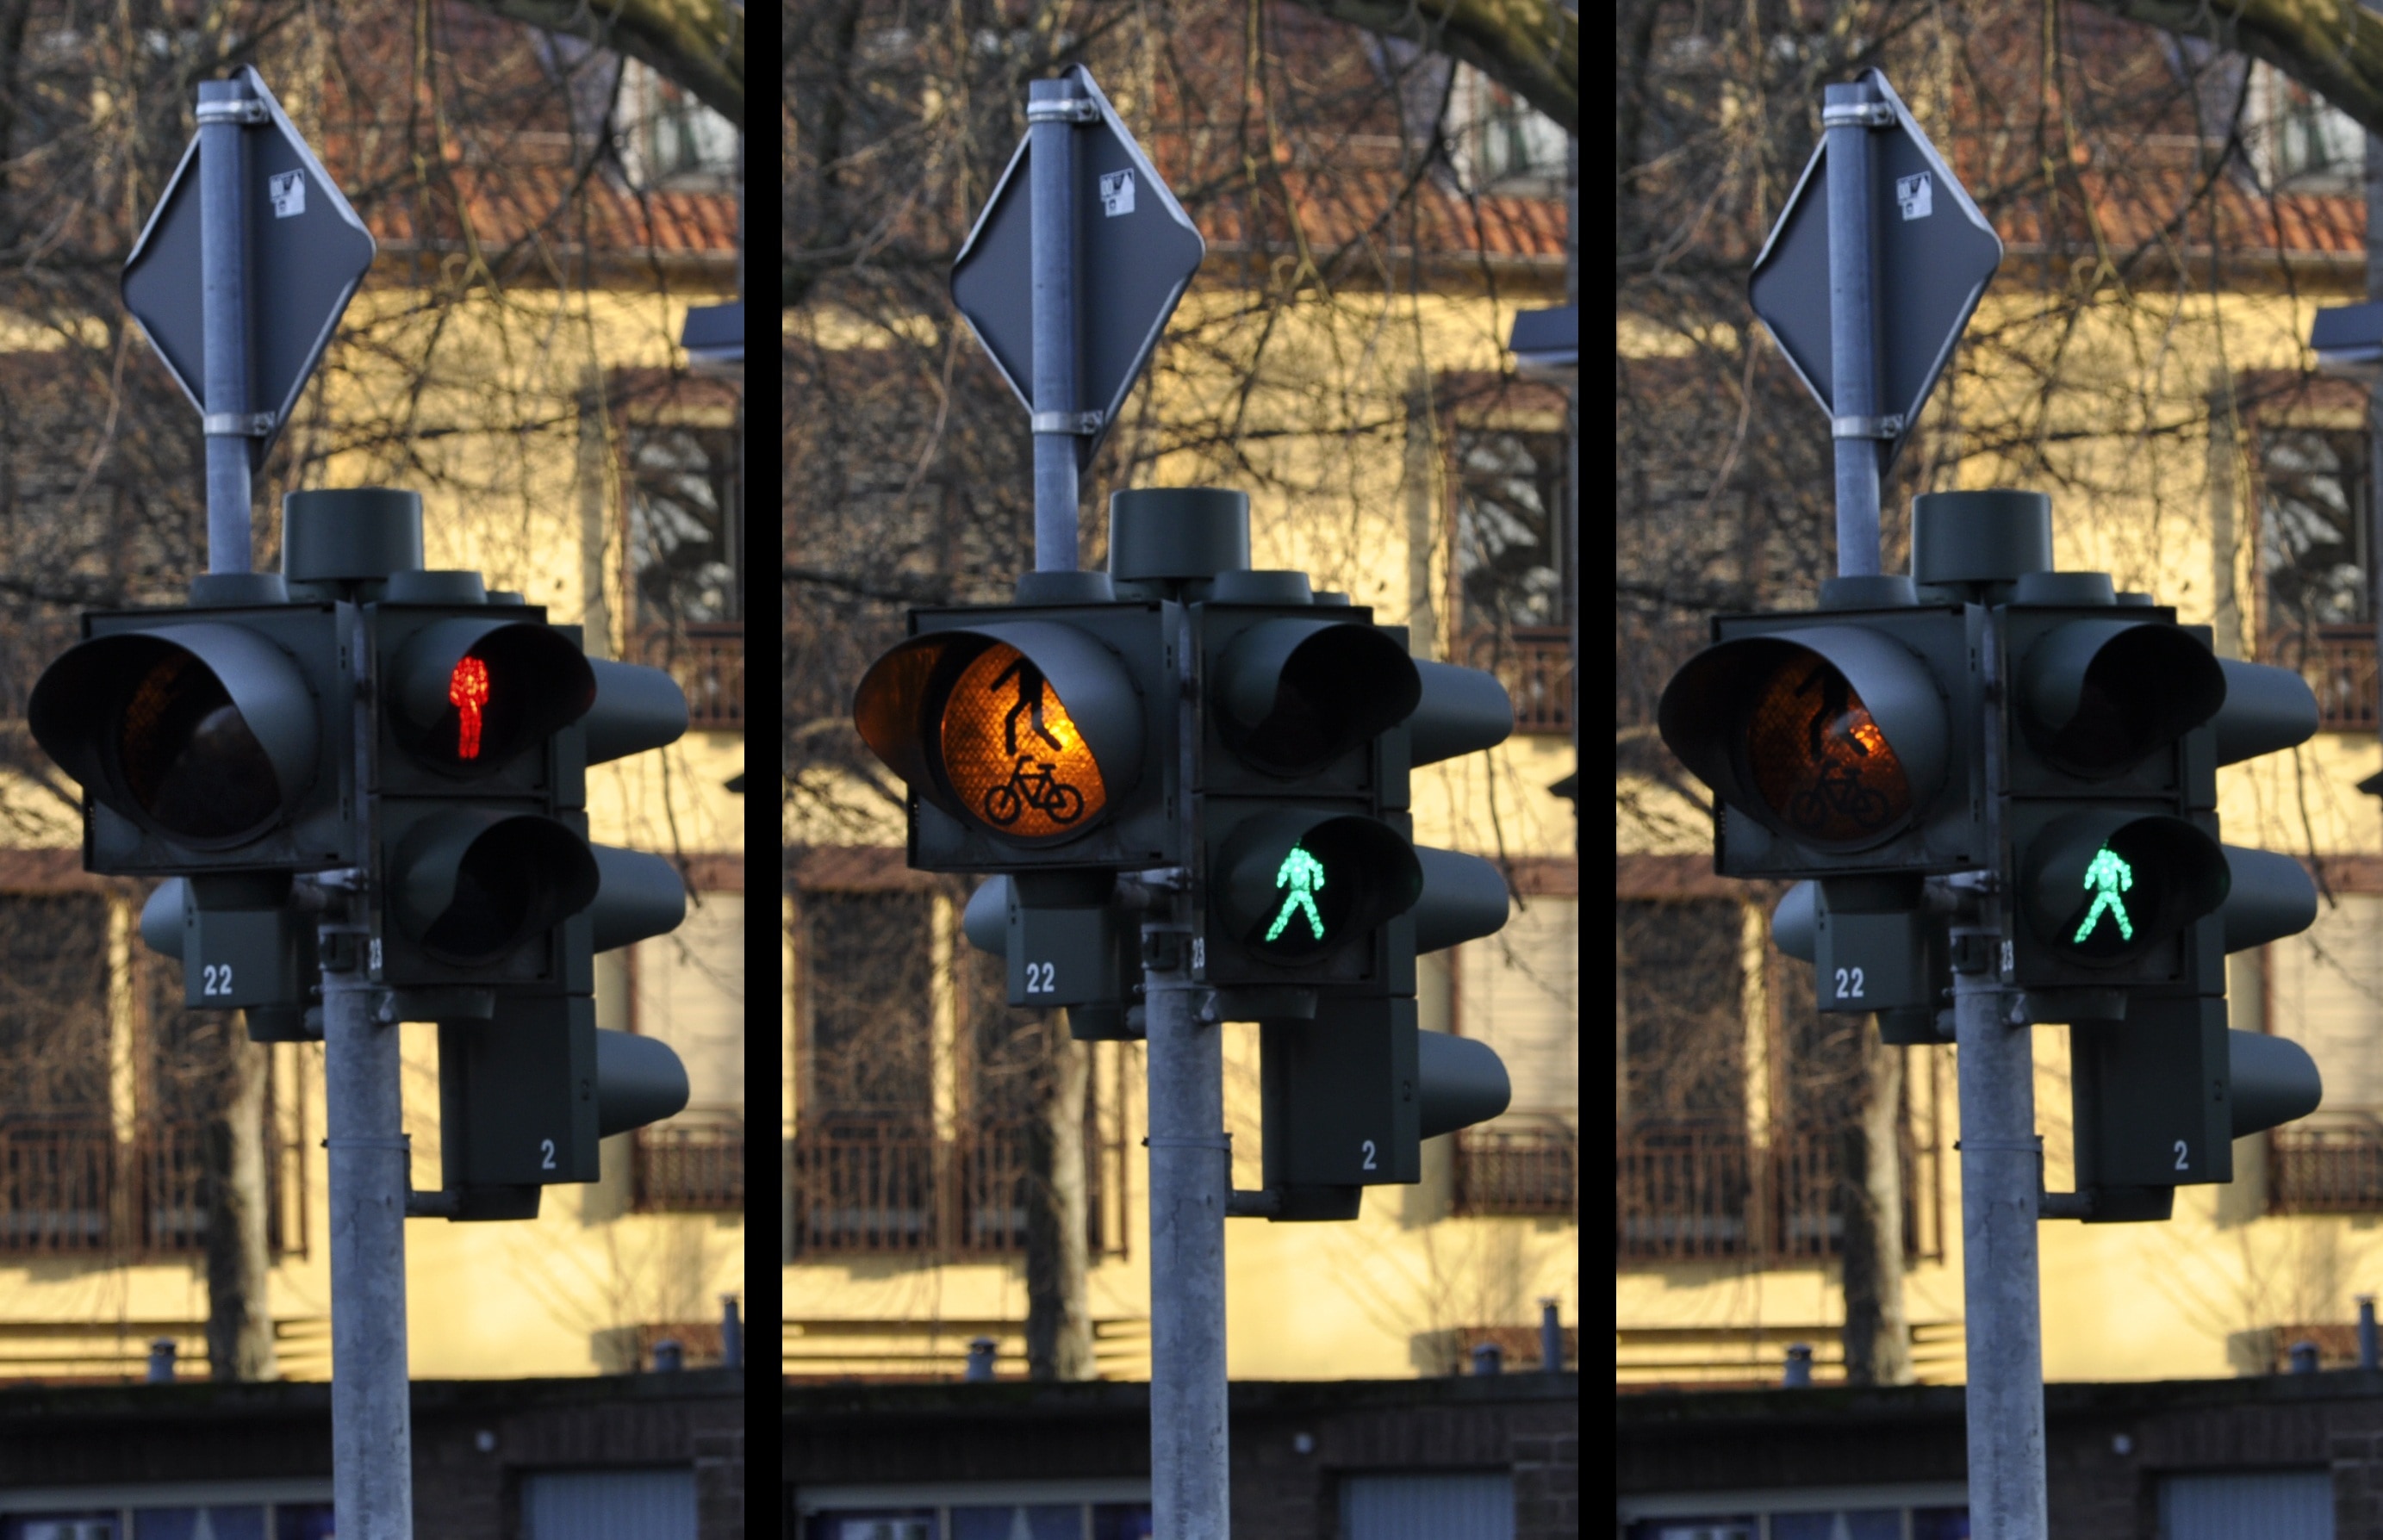 three traffic lights and stop, and pedestrian crossing during daytime